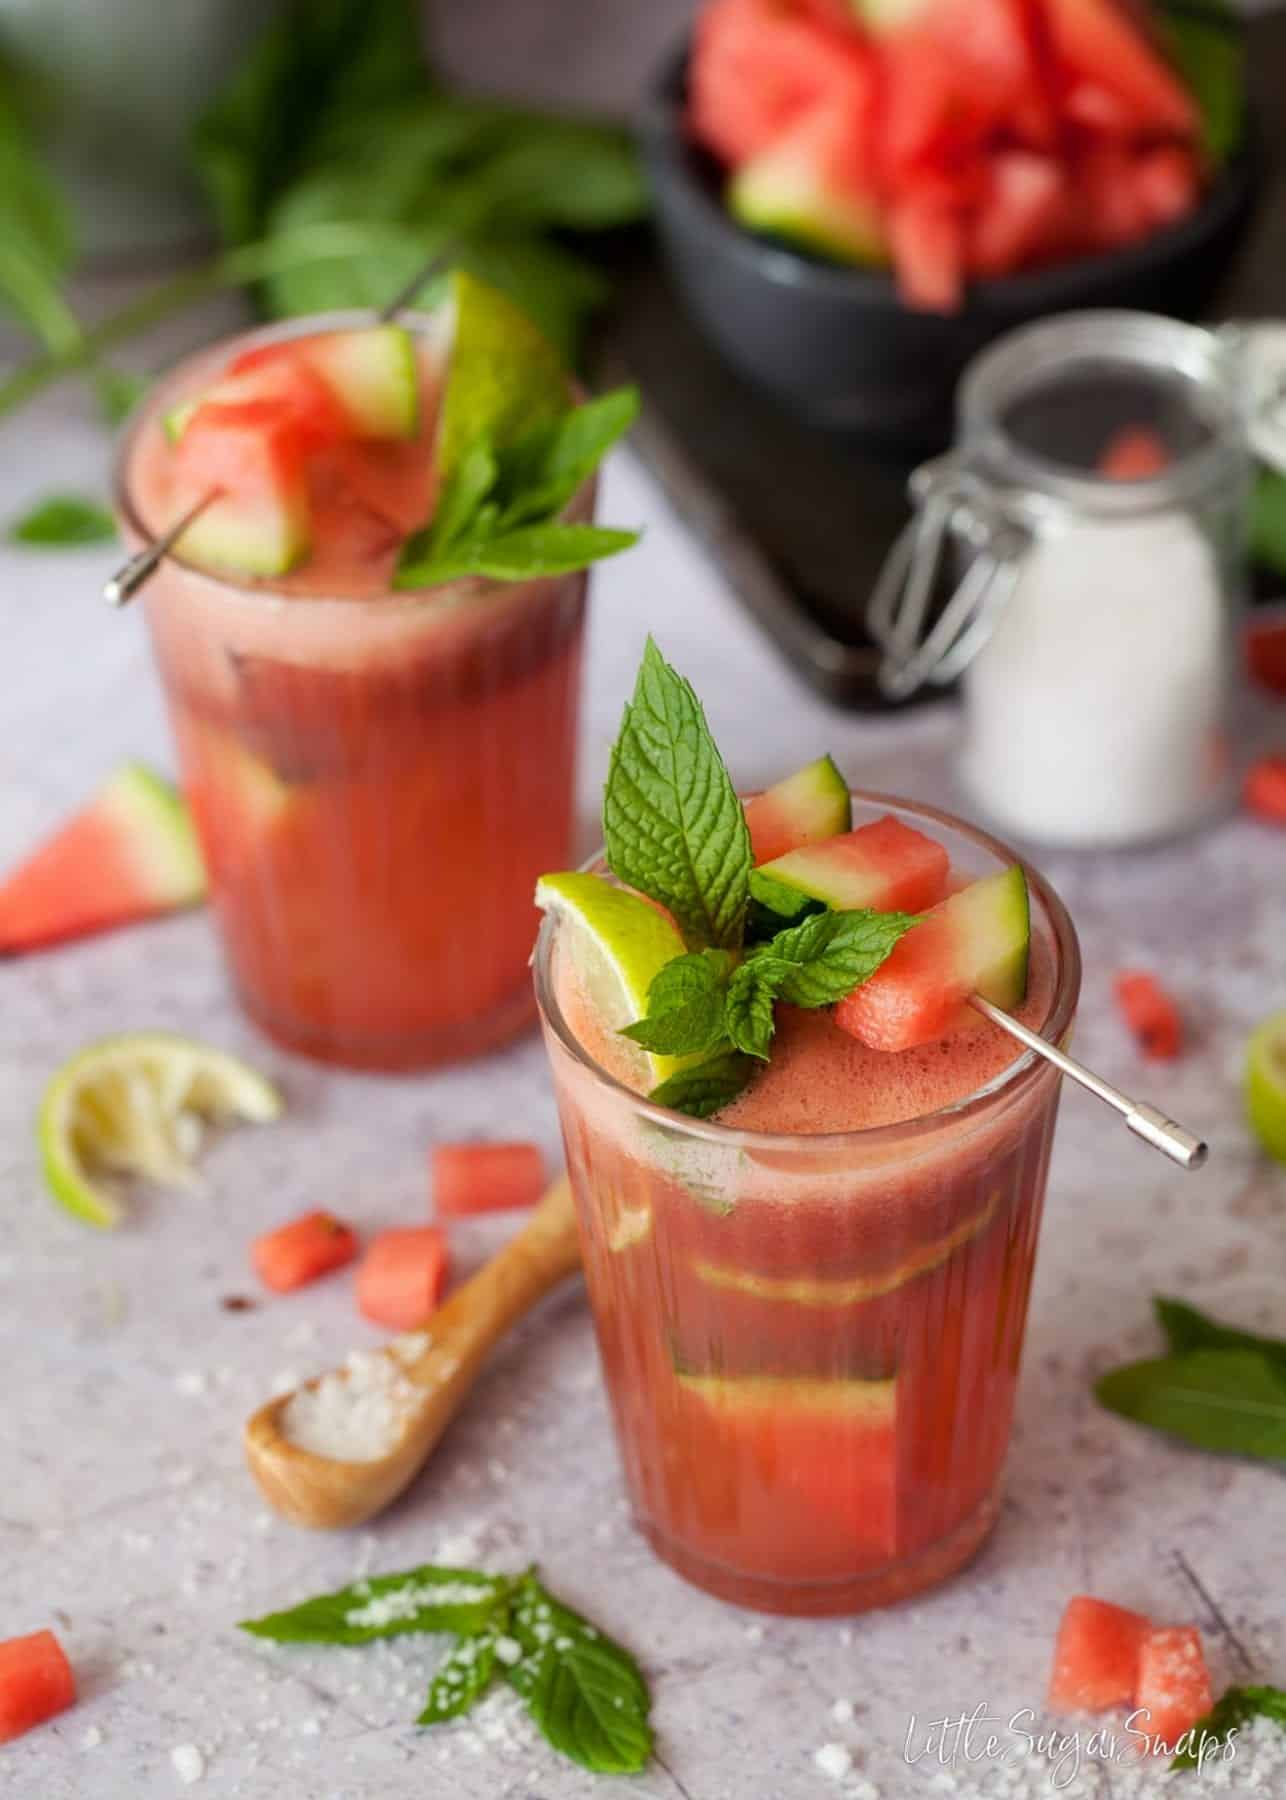 Salted Watermelon Mint Cooler with mint, melon and lime garnish